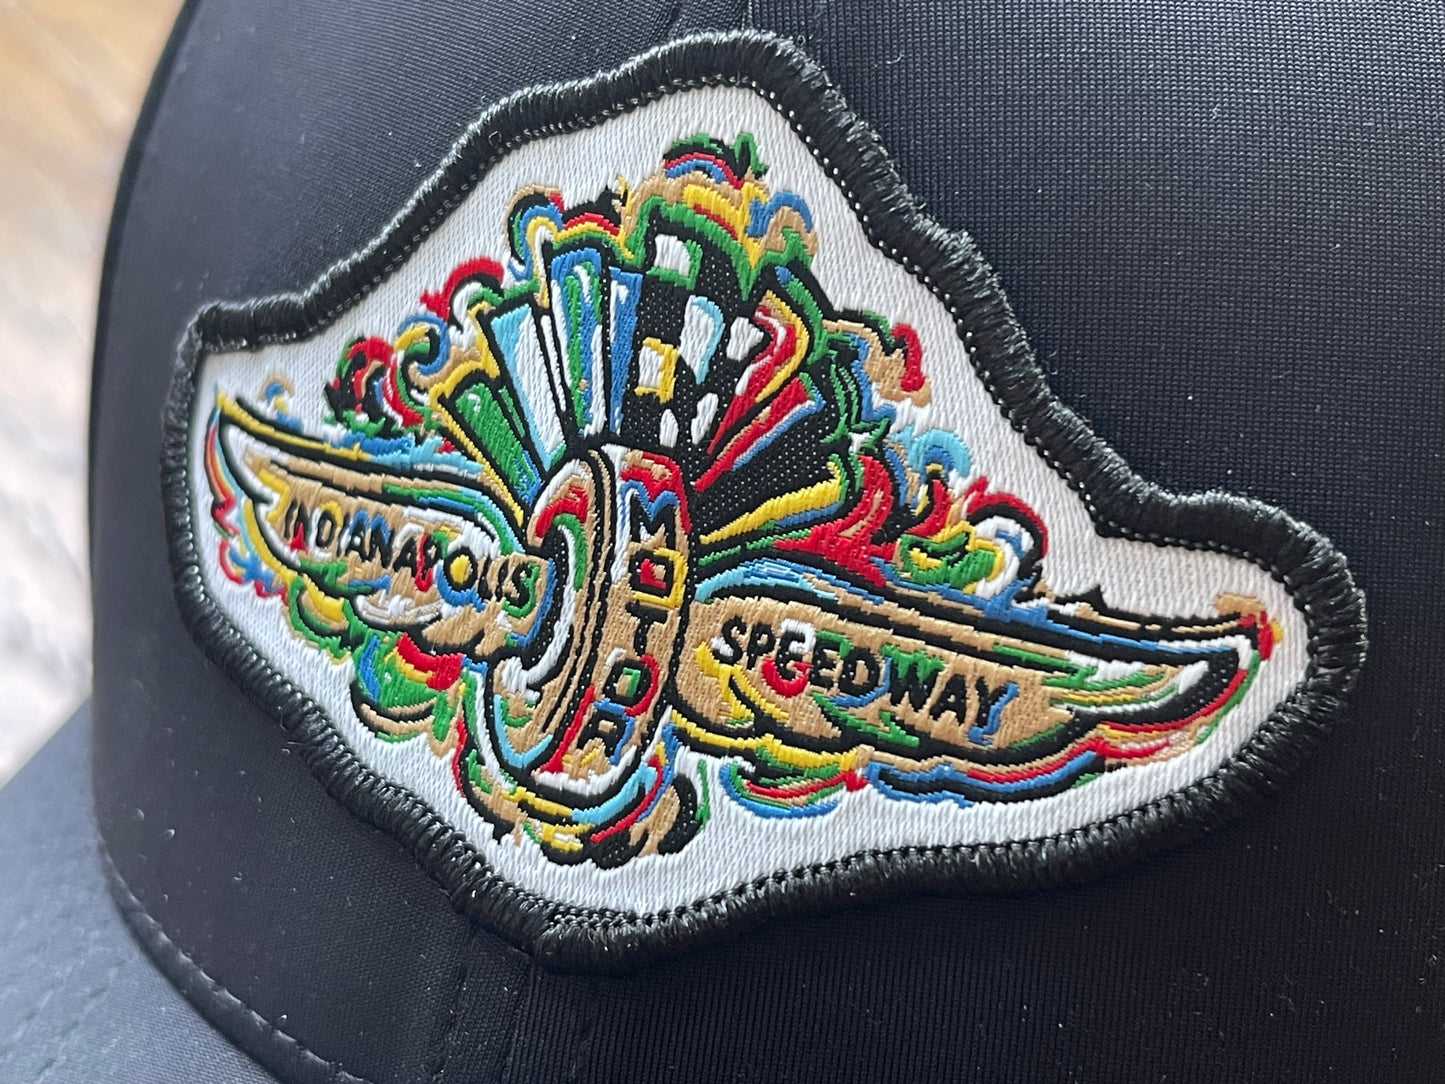 Indianapolis Motor Speedway Black Wing and Wheel Hat by Justin Patten